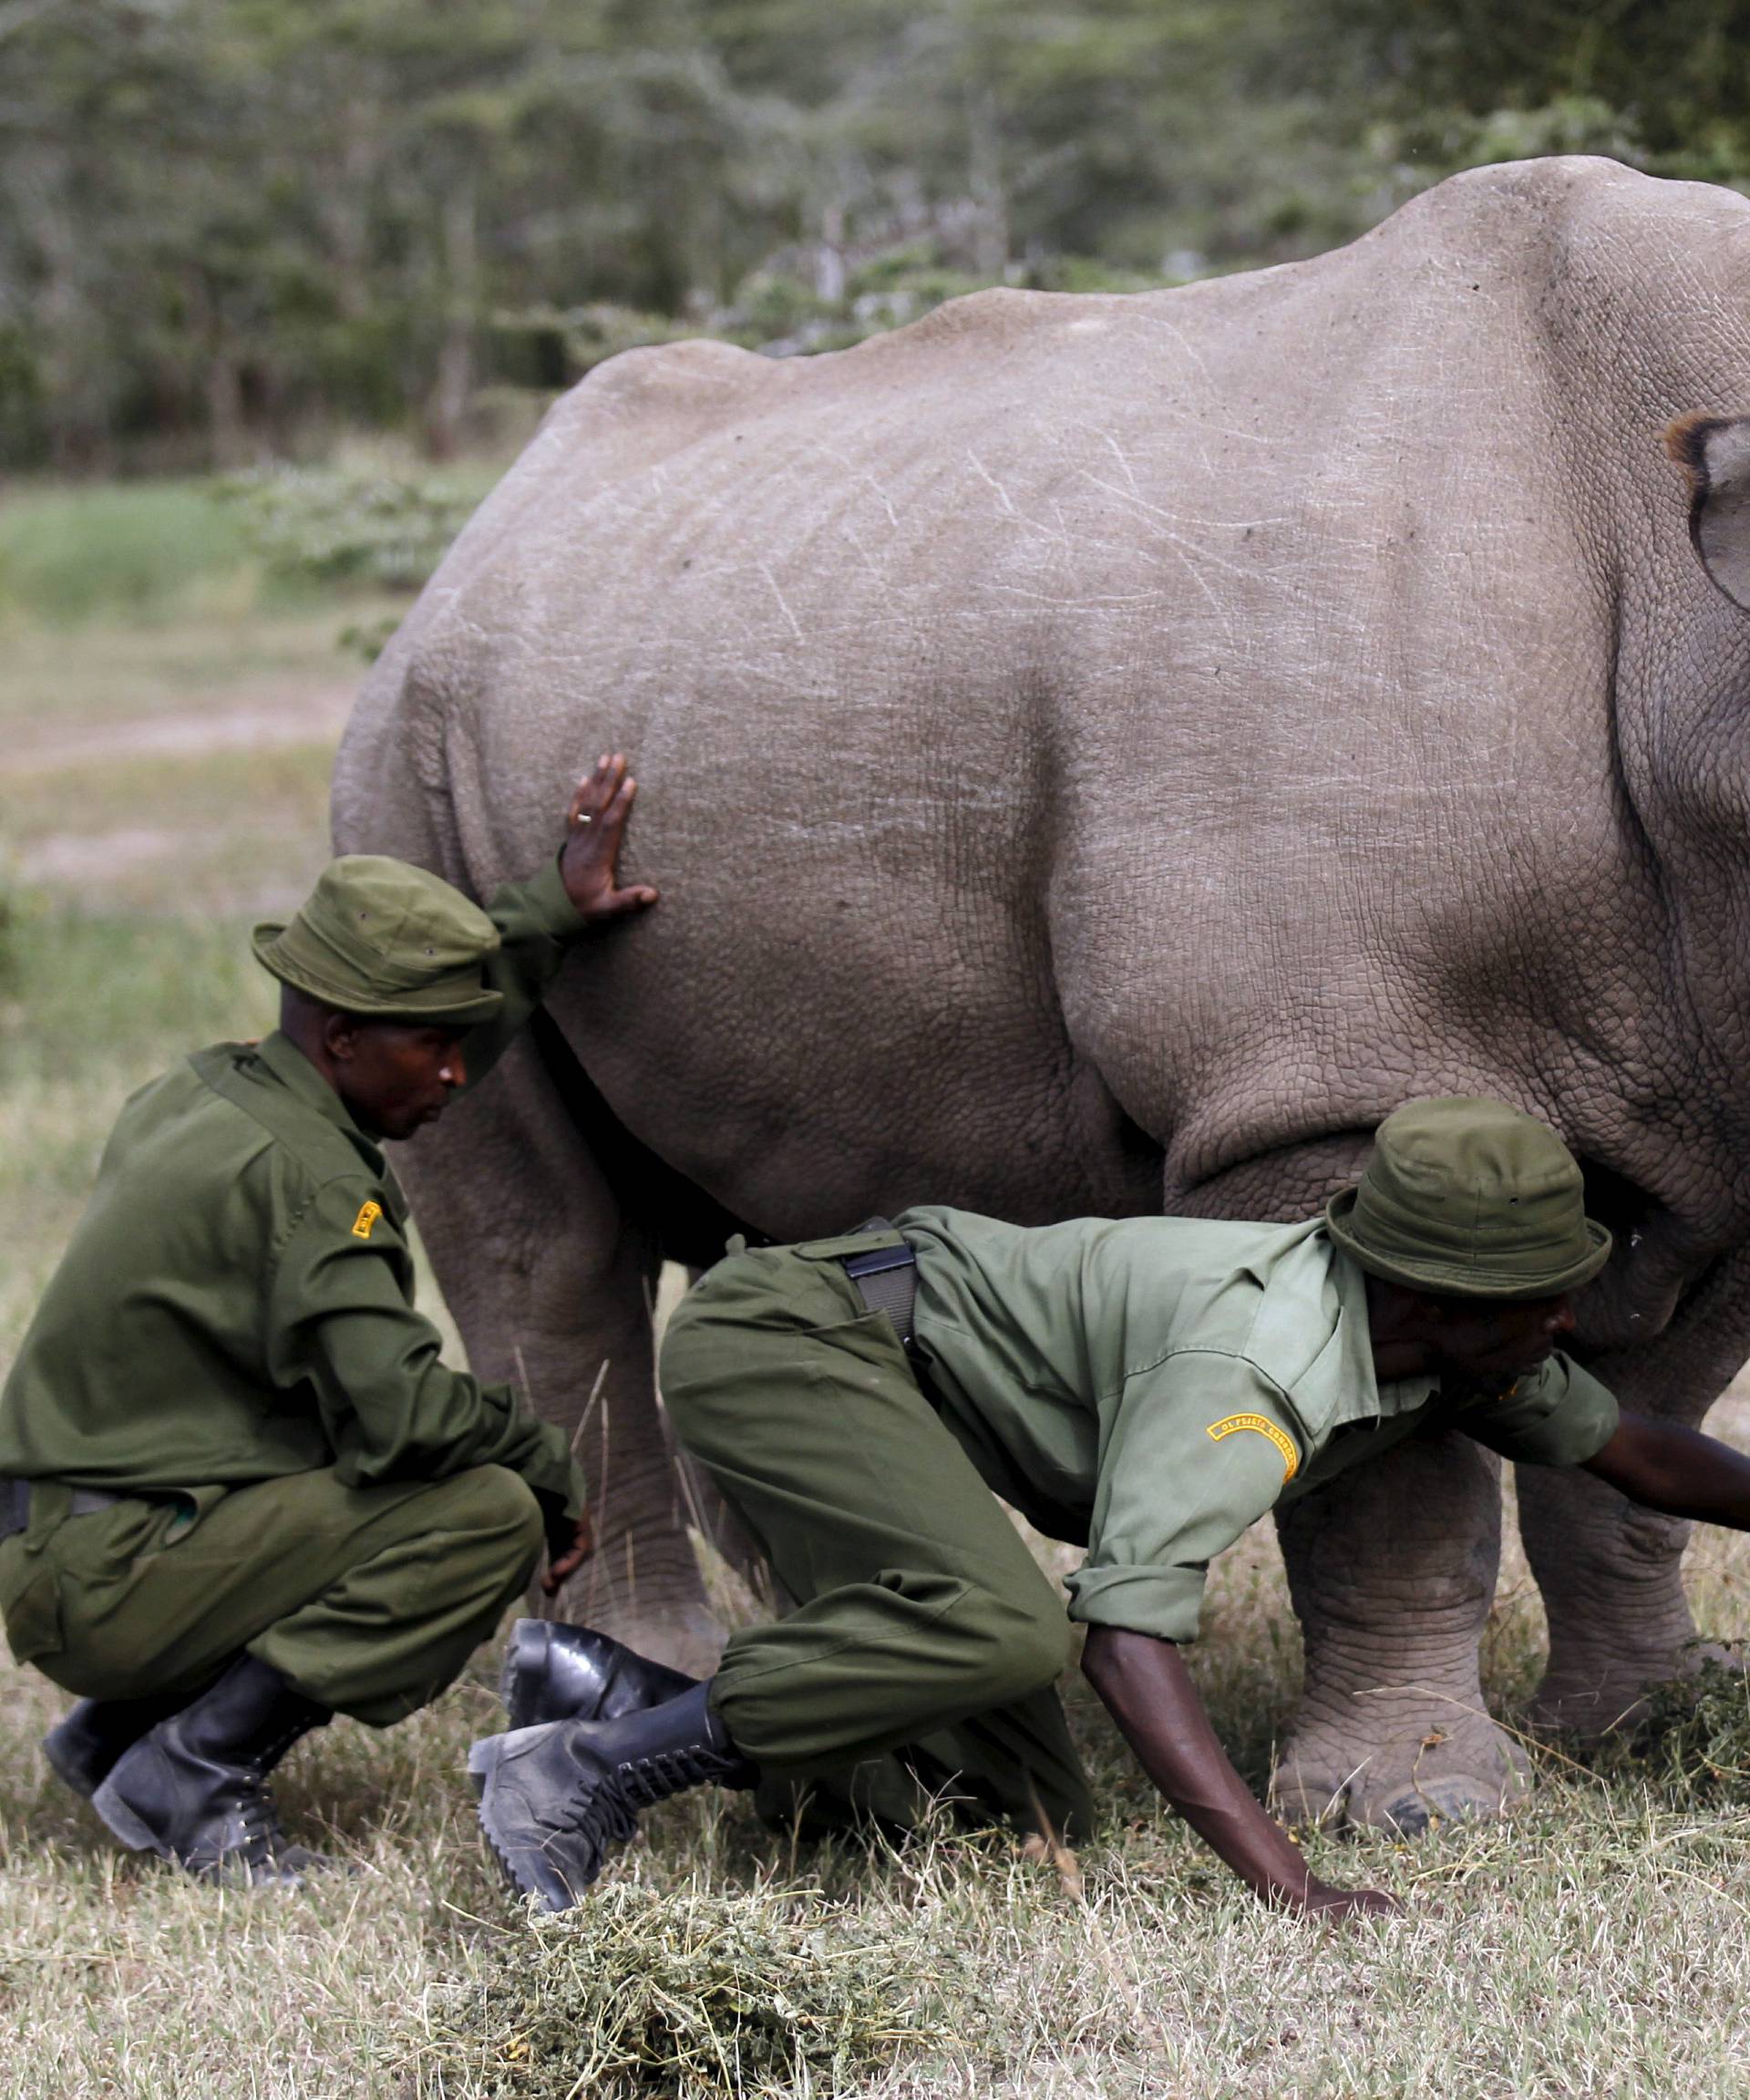 Wardens assist the last surviving male northern white rhino named 'Sudan' as it grazes at the Ol Pejeta Conservancy in Laikipia national park, Kenya